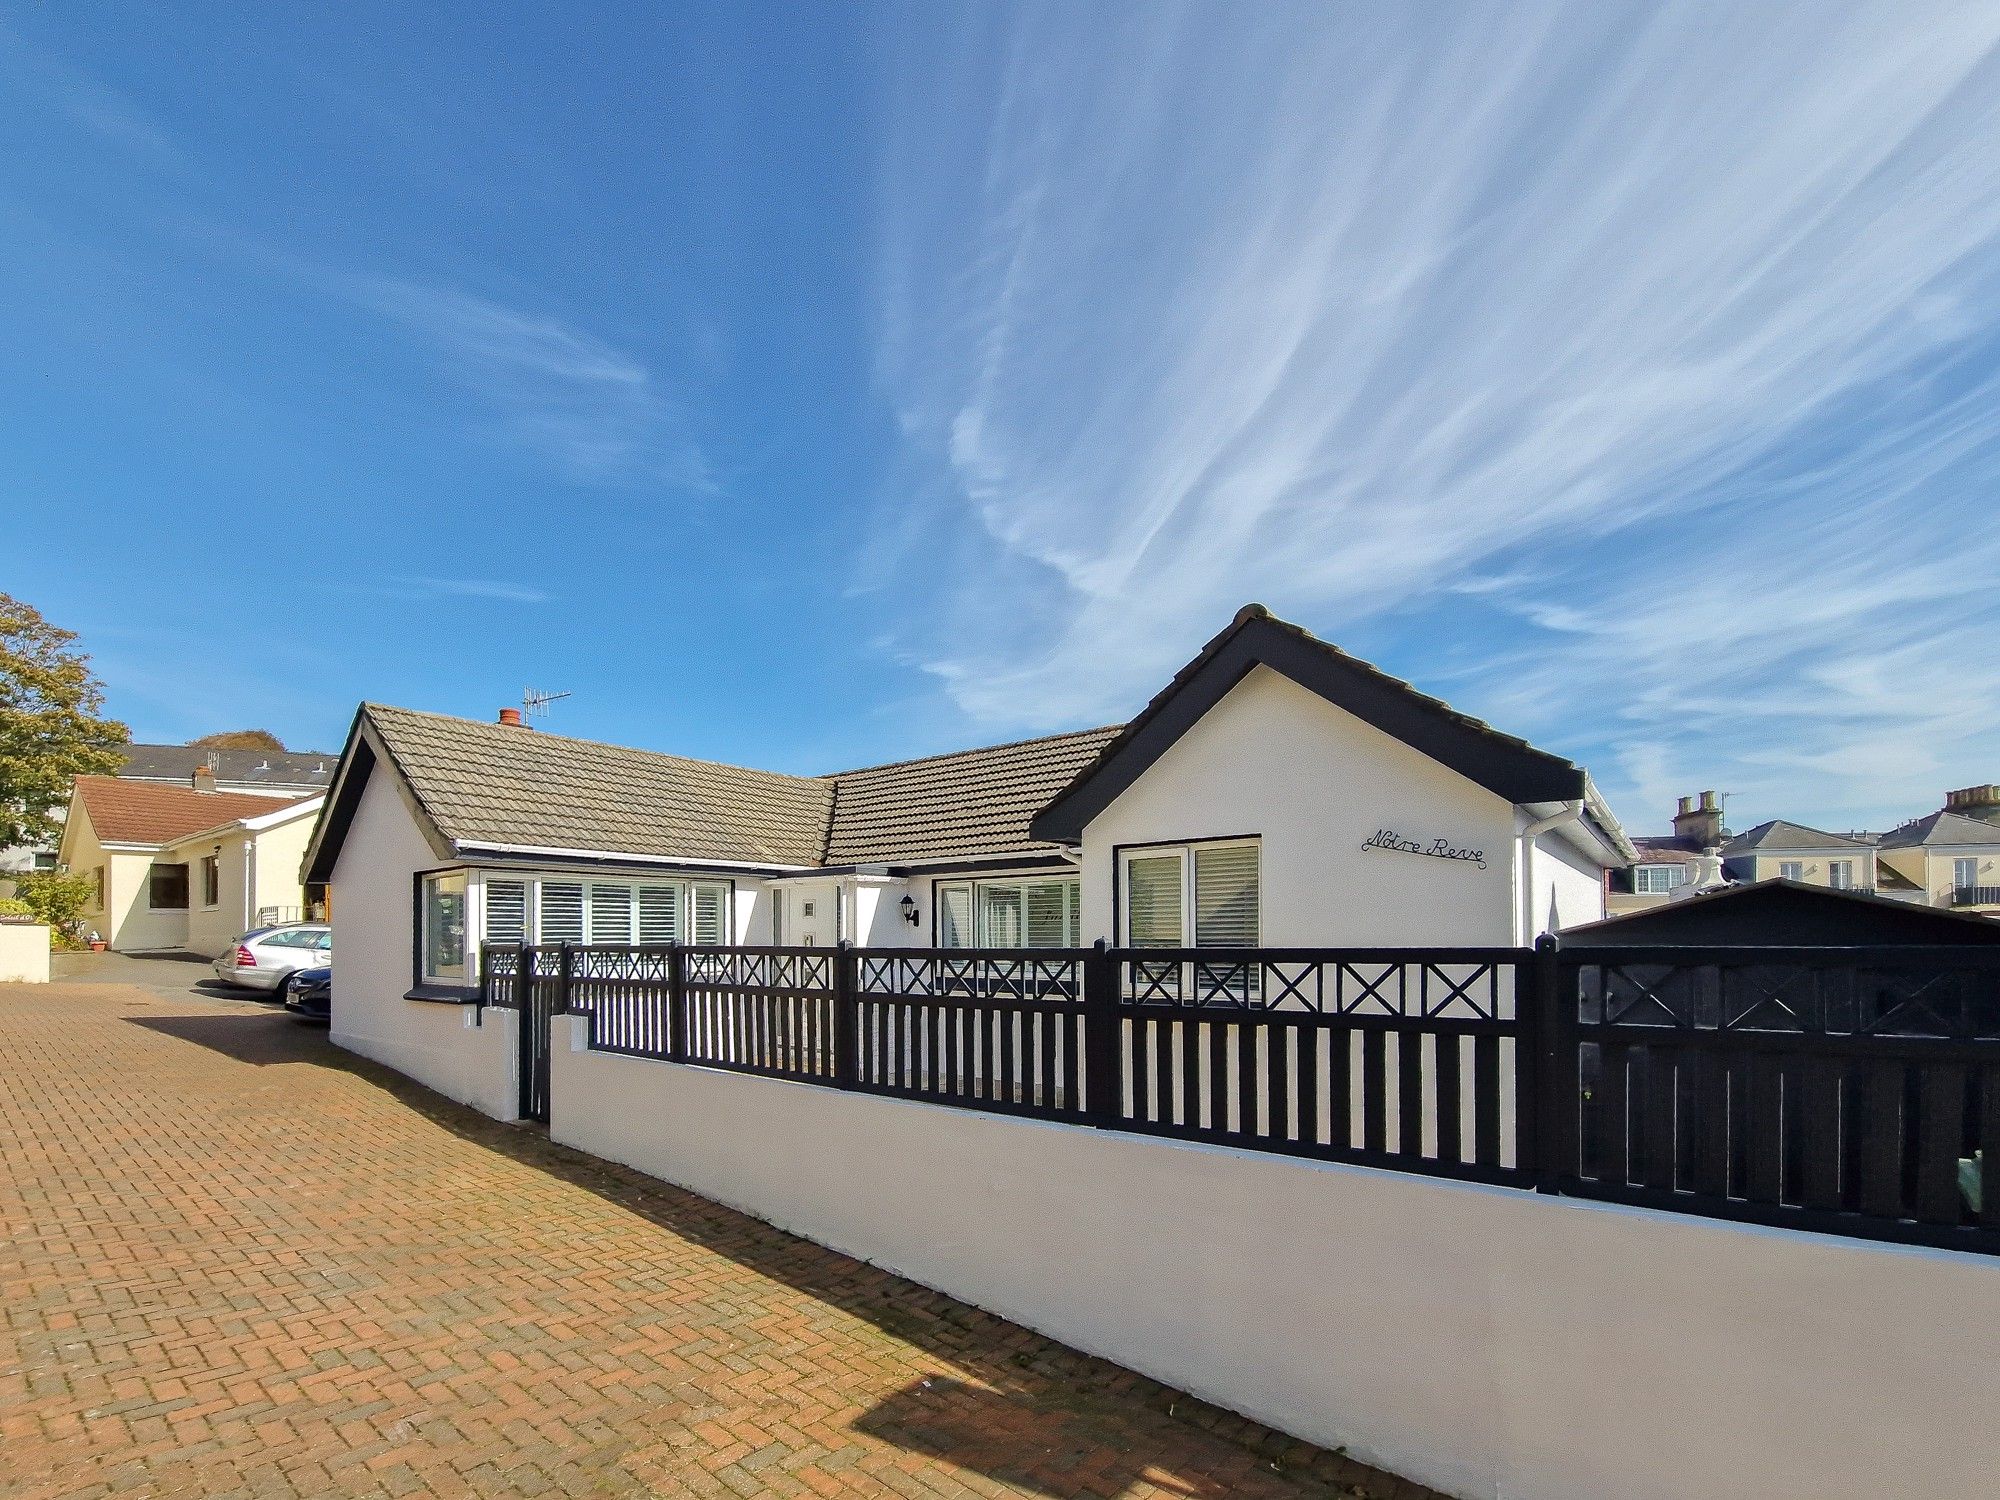 3 bed Property For Sale in St. Helier, Jersey